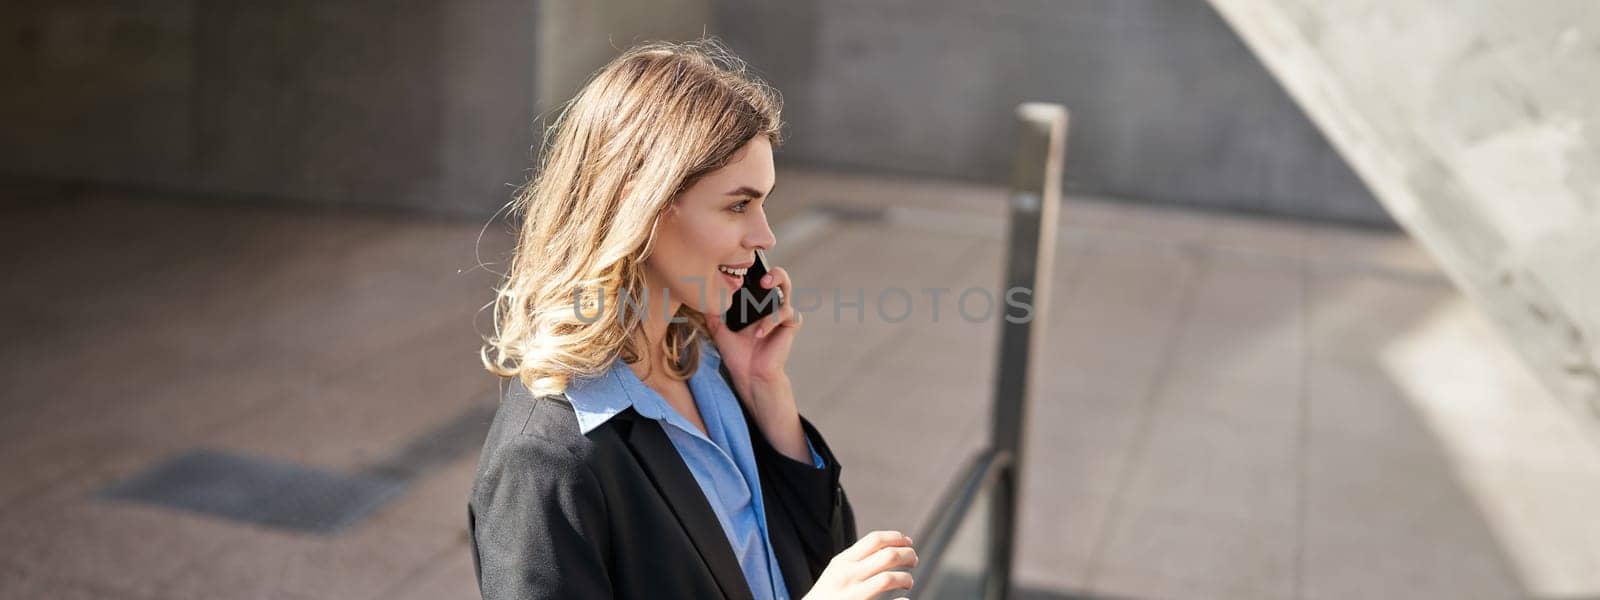 Corporate woman talking on mobile phone, making a call while in city, standing outdoors on escalator.